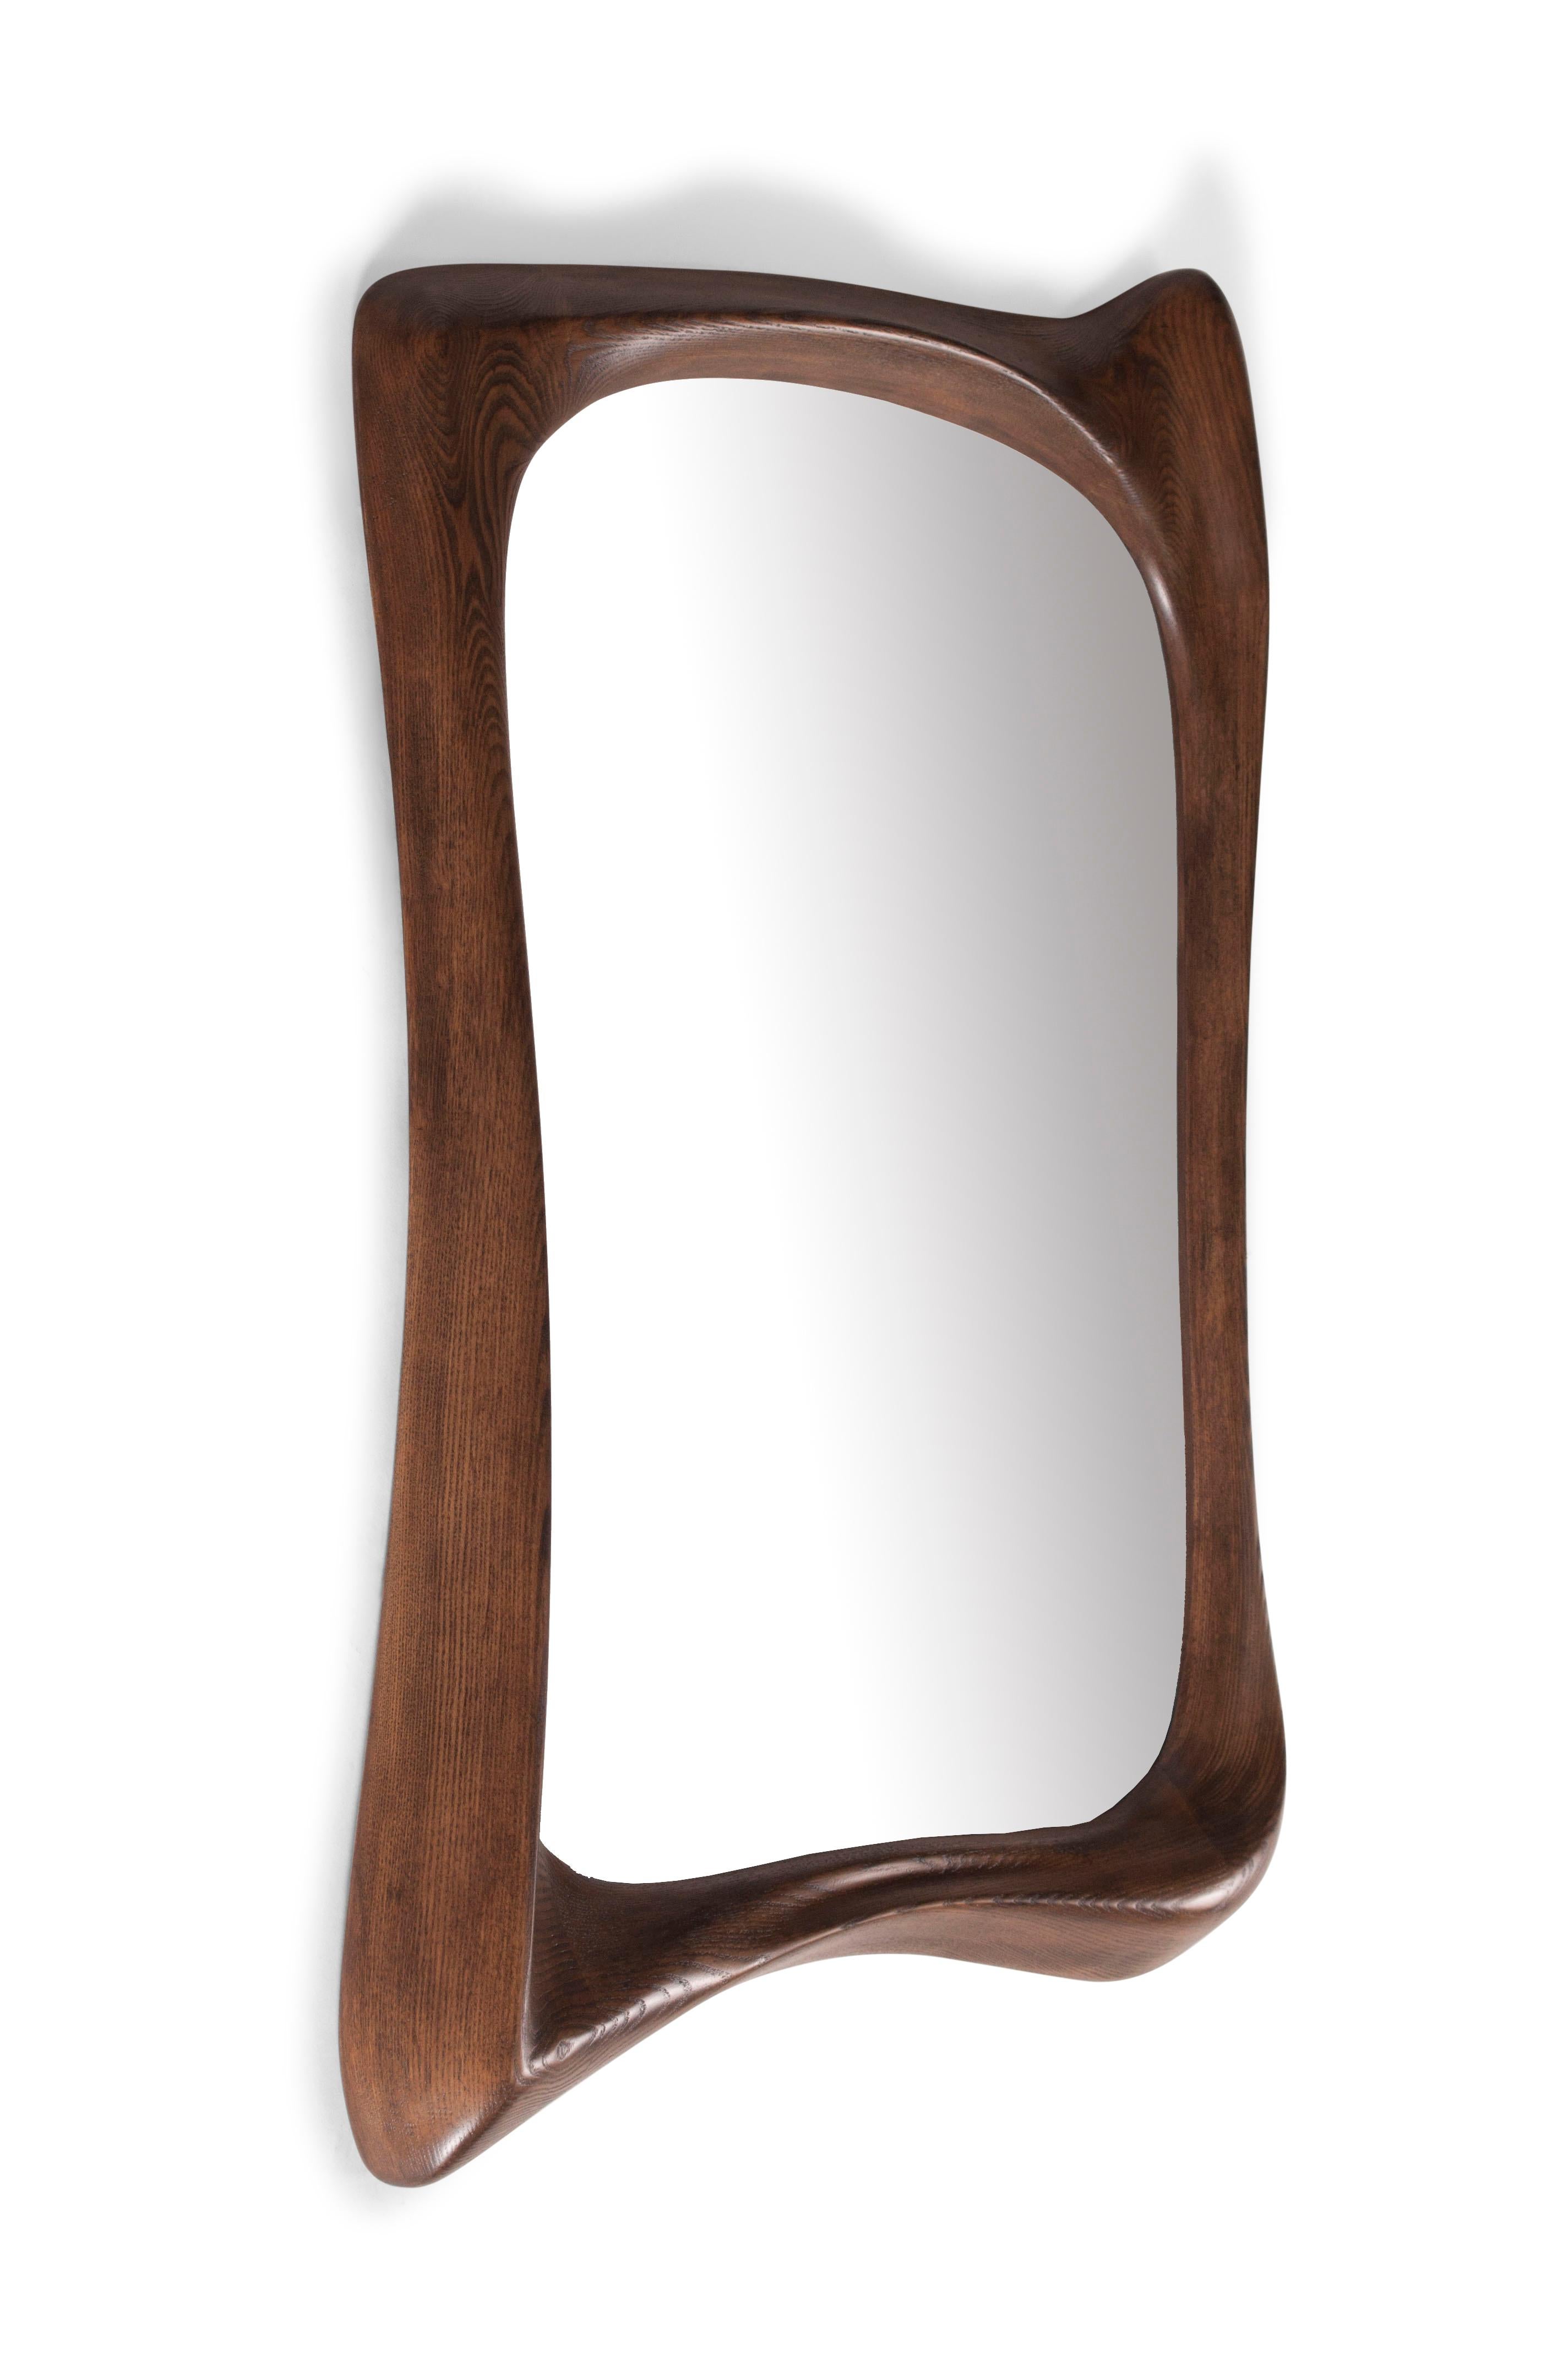 Modern Amorph Narcissus Mirror in Graphite Walnut stain on Ash wood For Sale